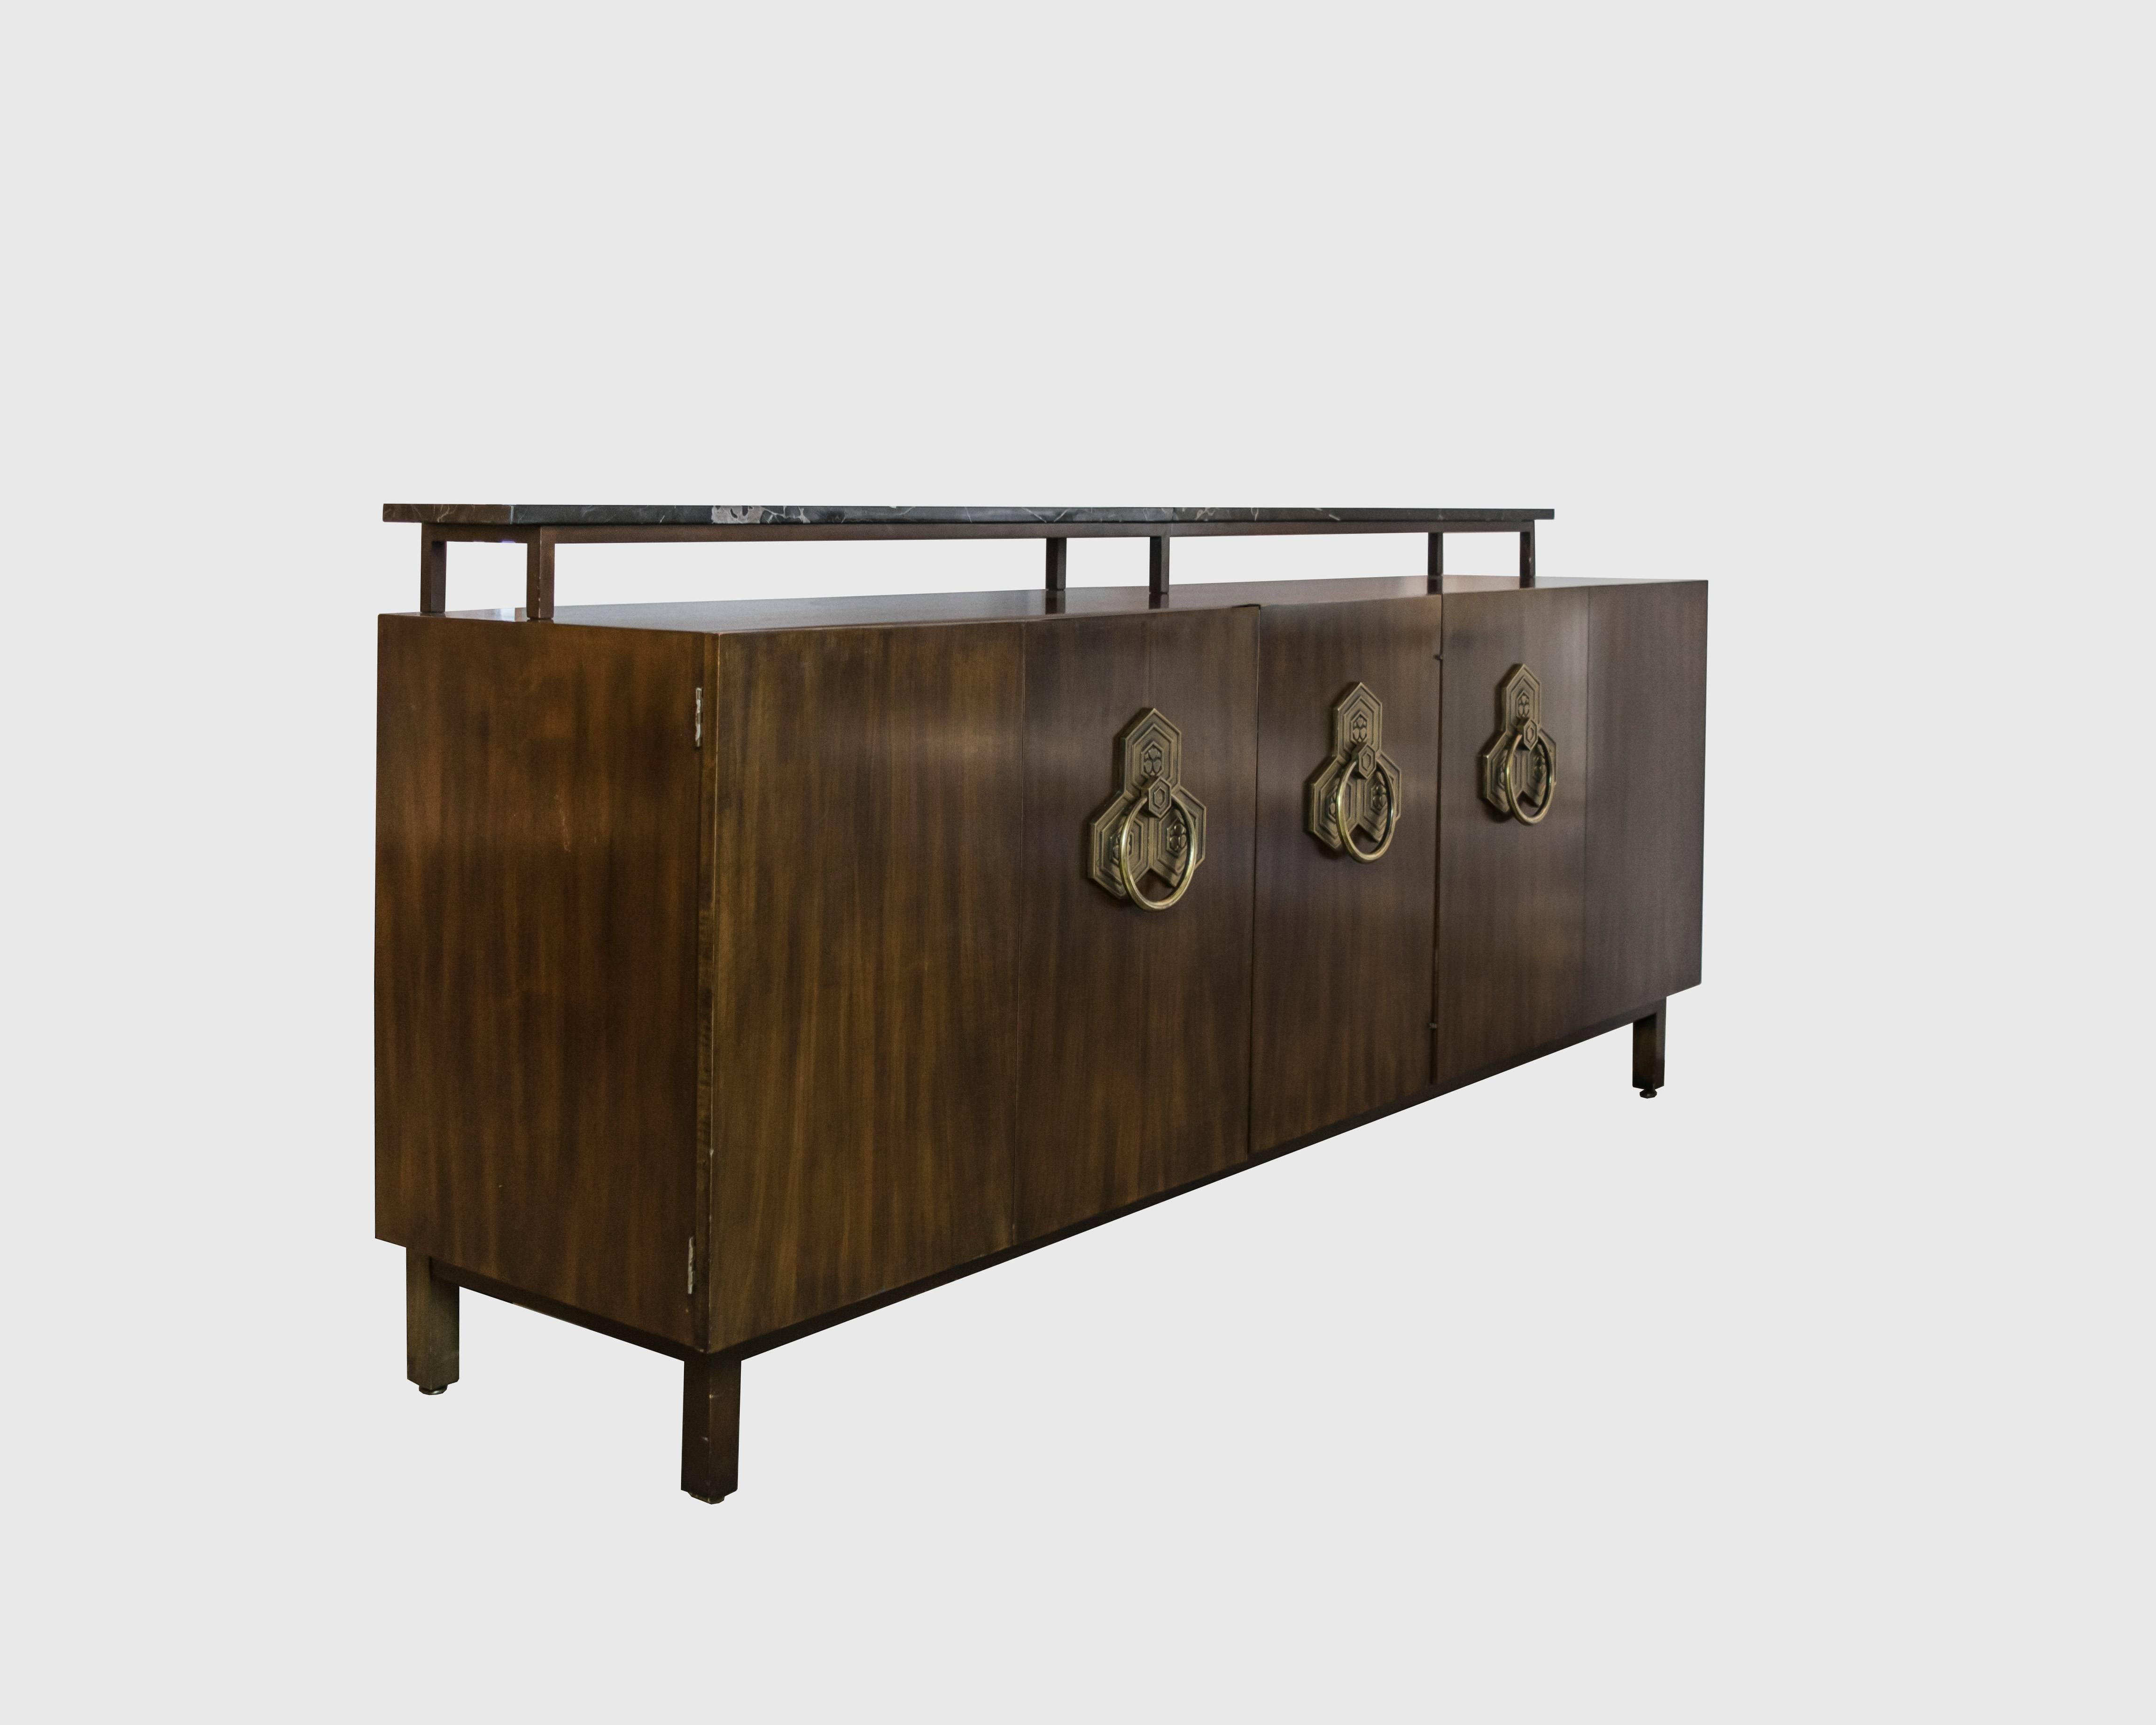 An absolutely elegant credenza by the master Robsjohn-Gibbings. Extra long with 5 panel front and intricate yet large brass hardware. We are not sure if the top marble piece is original to the console. It appears to have been added at some point so